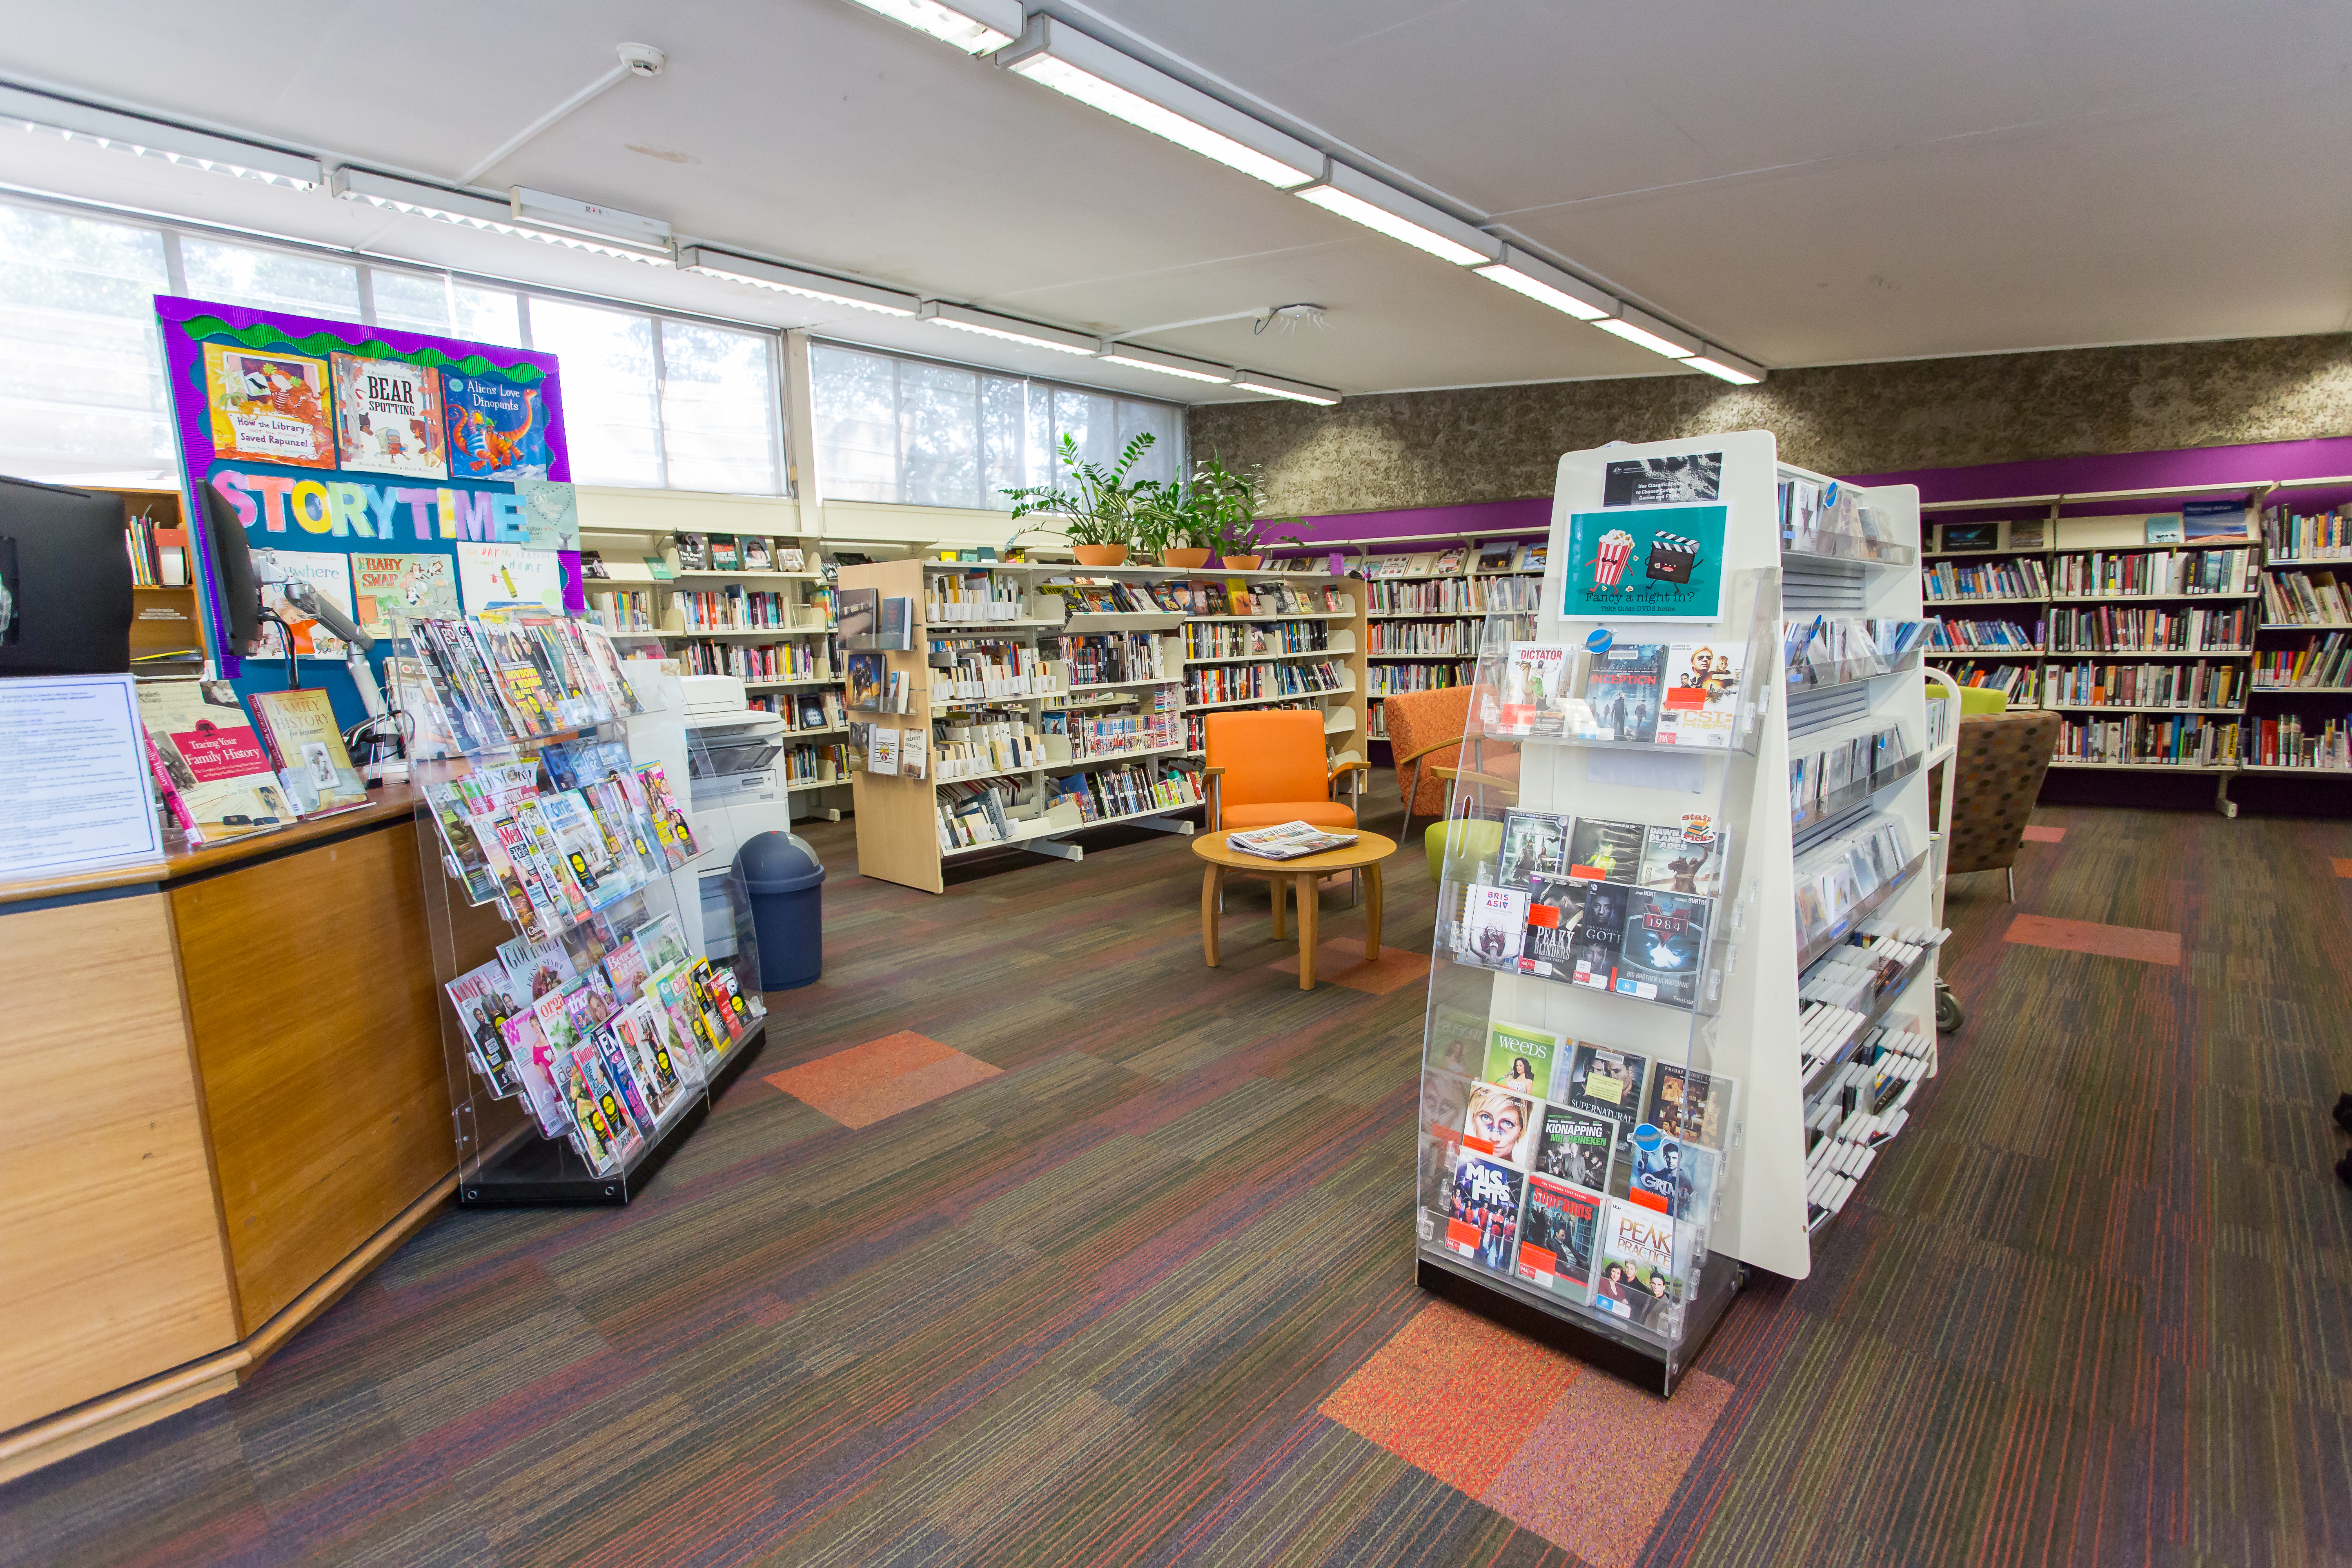 This is an image of the interior of the Local heritage place know as Annerley Library & Community centre